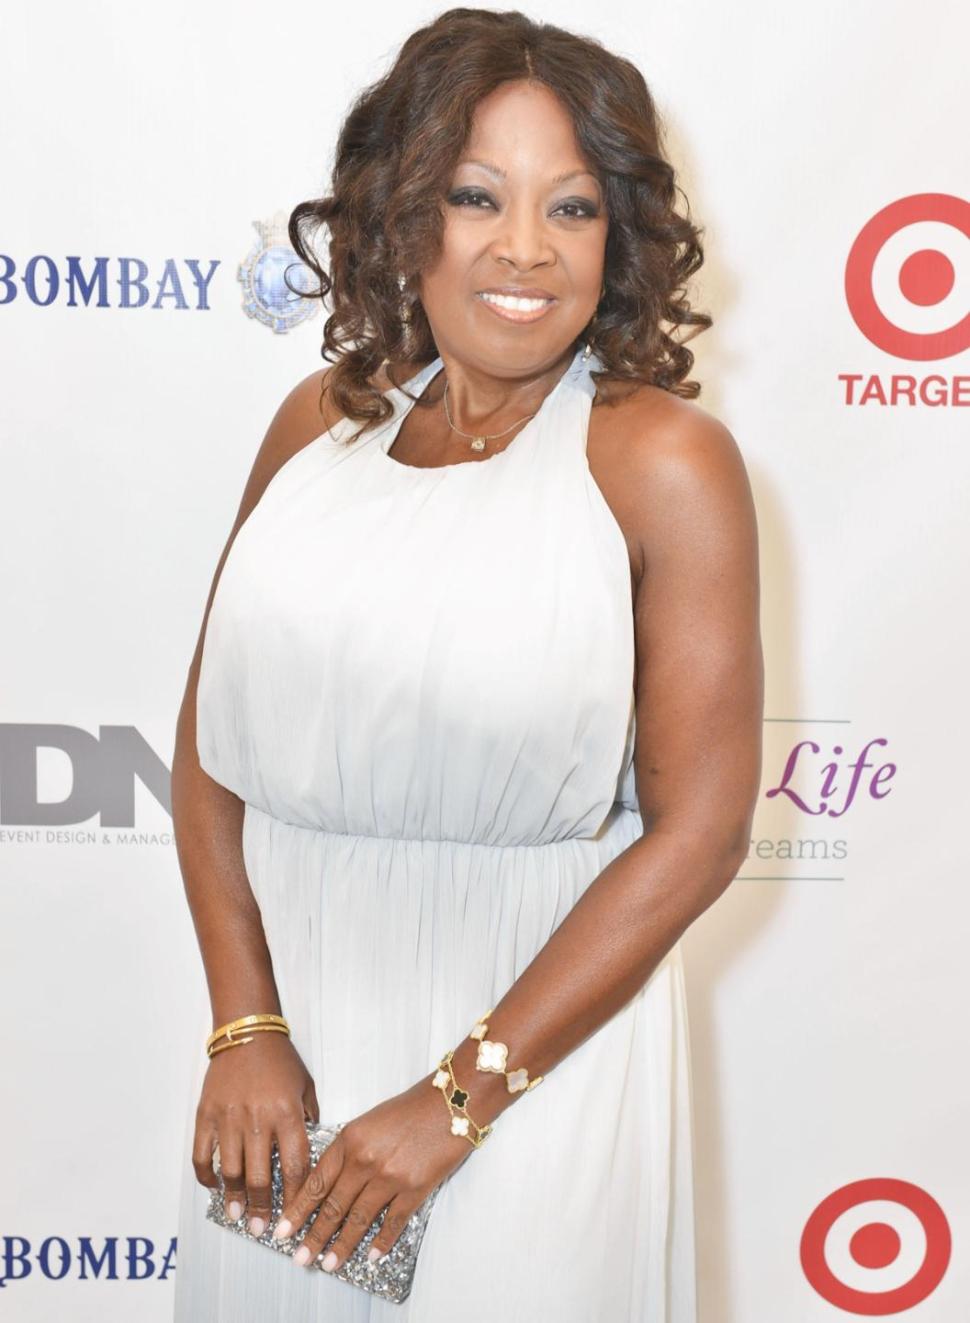 Star Jones says she keeps up with her old pals from ‘The View,’ but doesn’t have time to watch it.